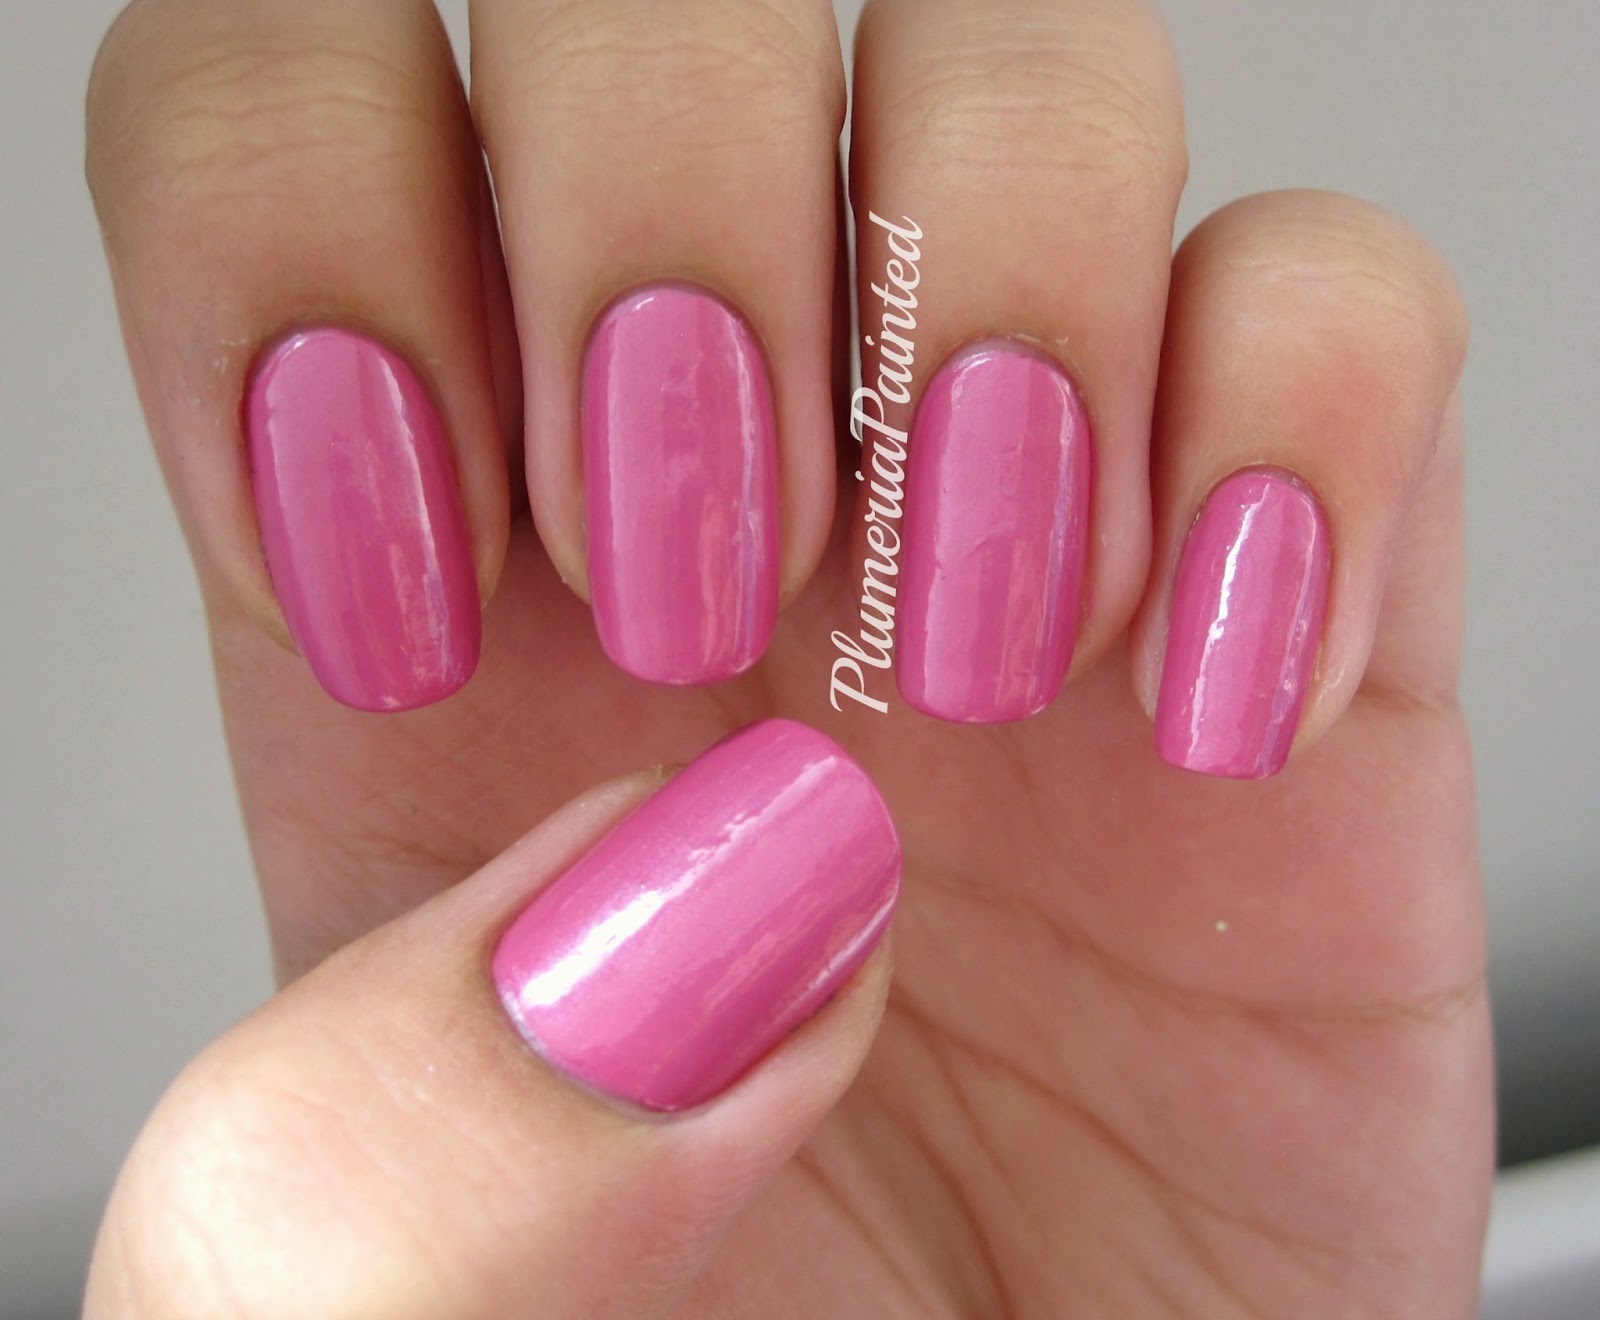 1. "Pink Champagne" Nail Polish by OPI - wide 3